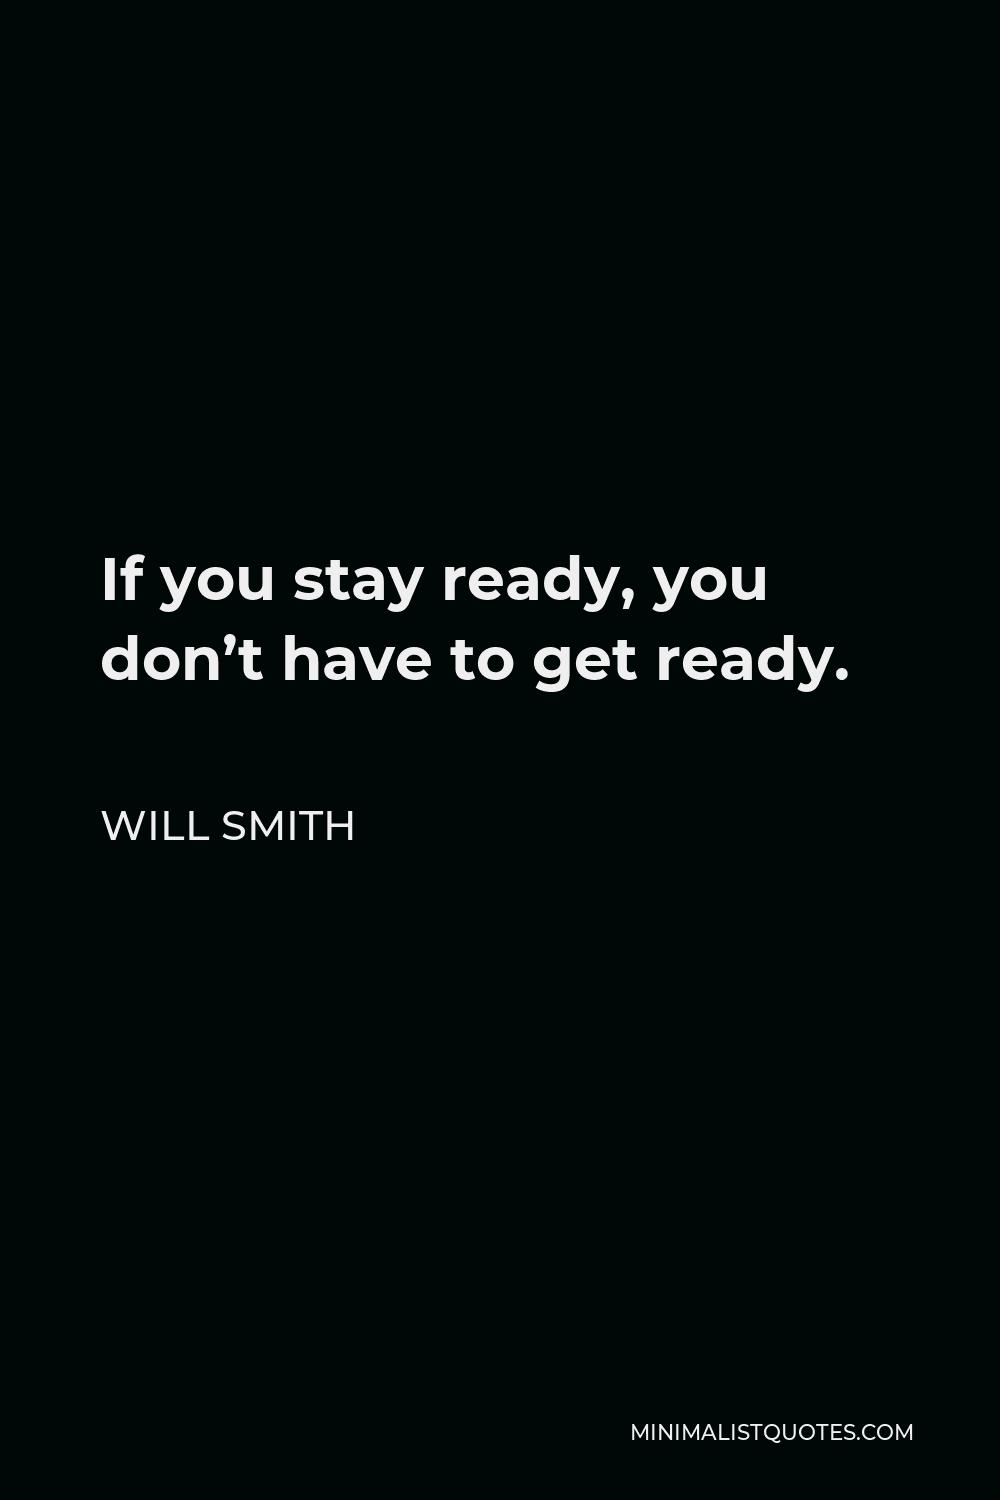 Will Smith Quote - If you stay ready, you don’t have to get ready.